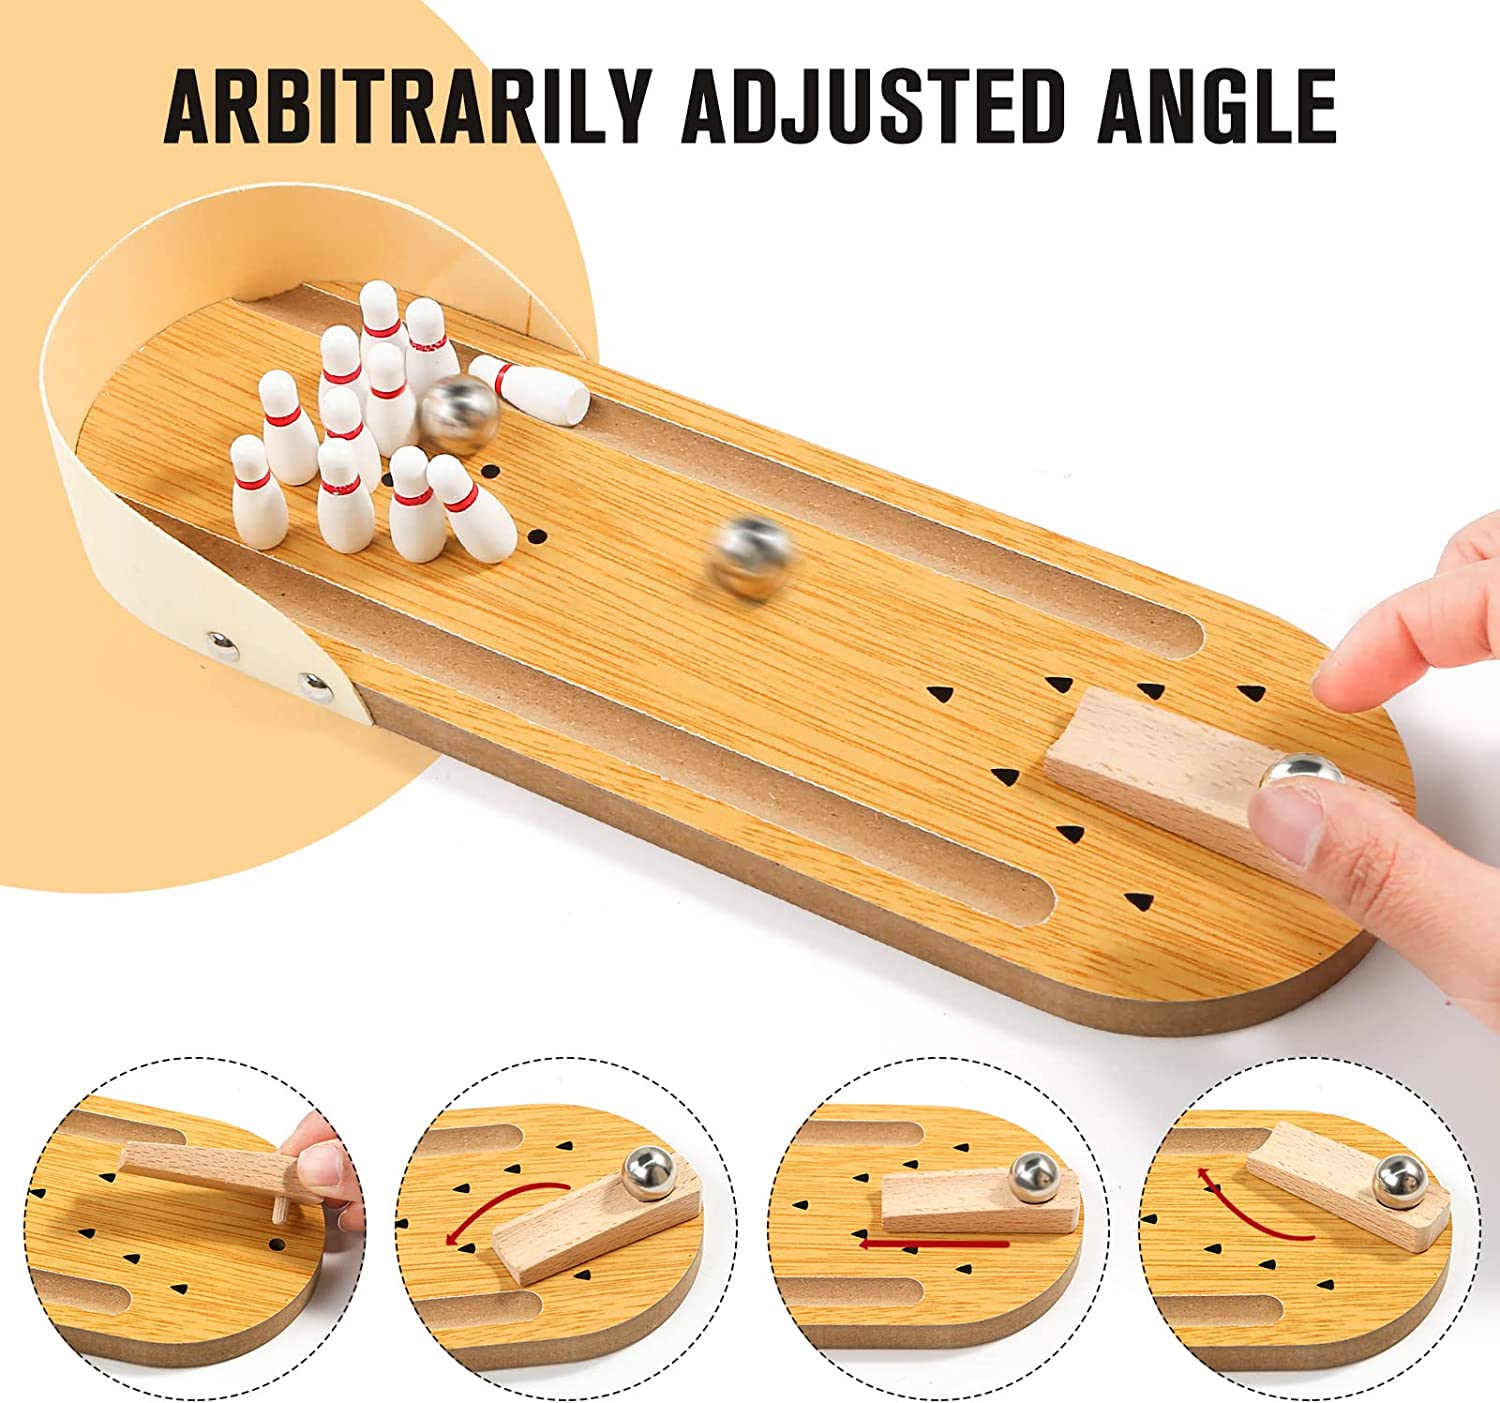 A collage of images which features several images of the adjustable ramp that comes with the mini table top bowling game. This shows how the ramp can be positioned into different angles to get the perfect shot.